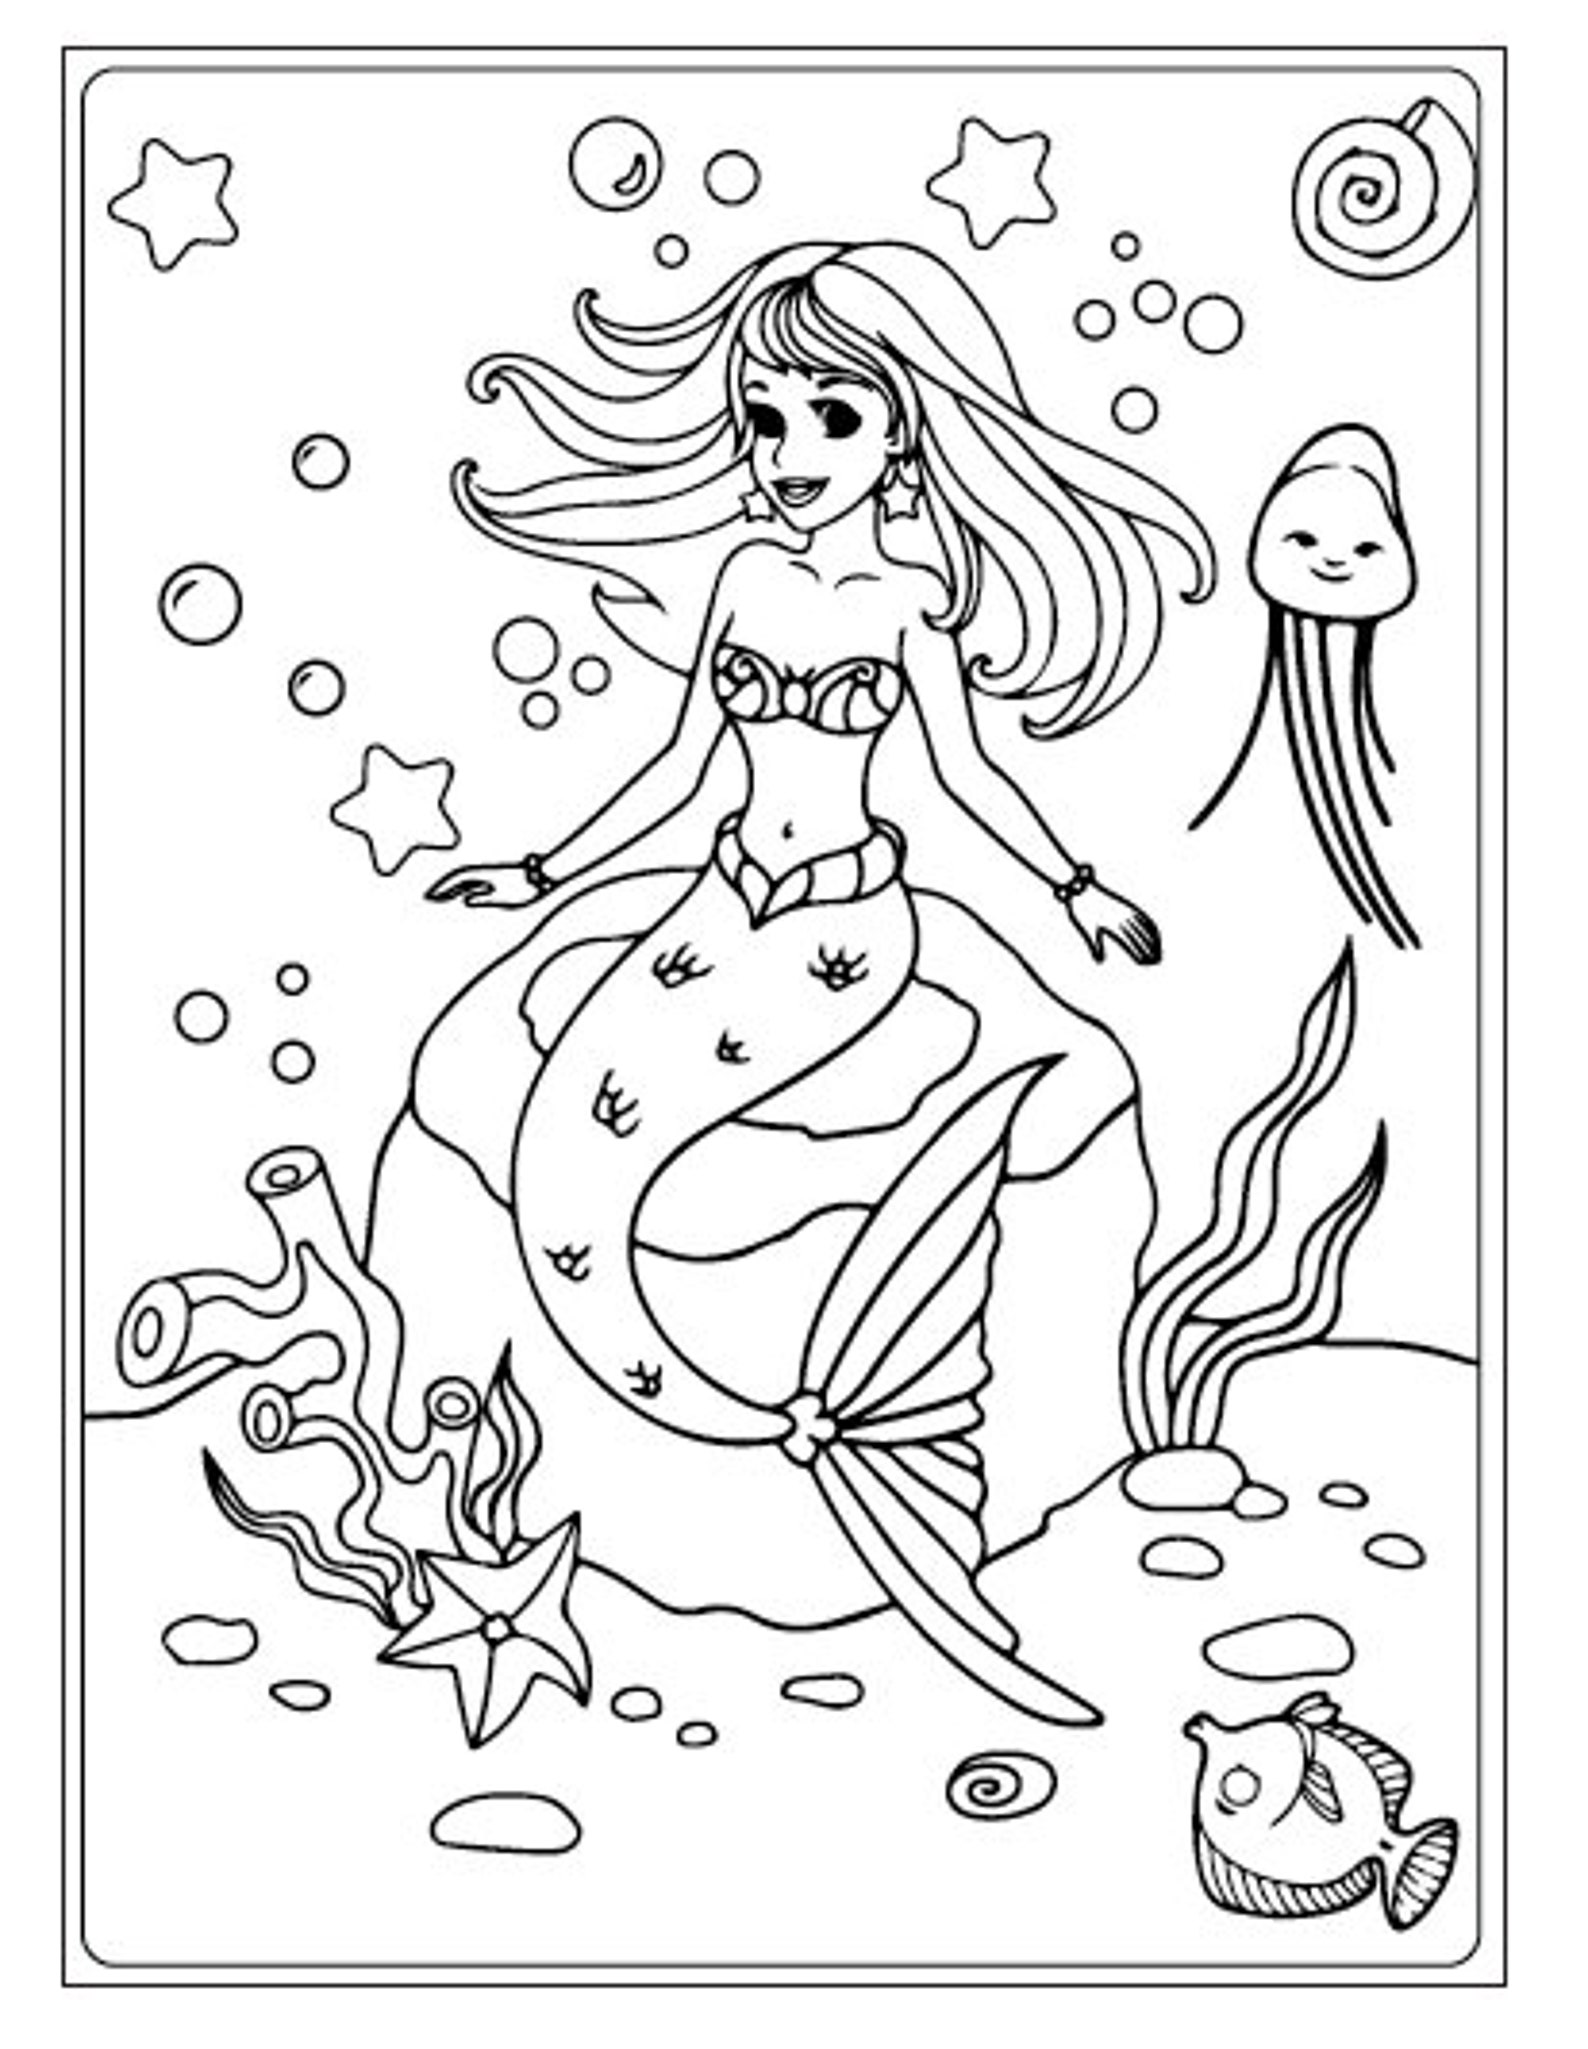 100 Mermaid Coloring Pages - Etsy